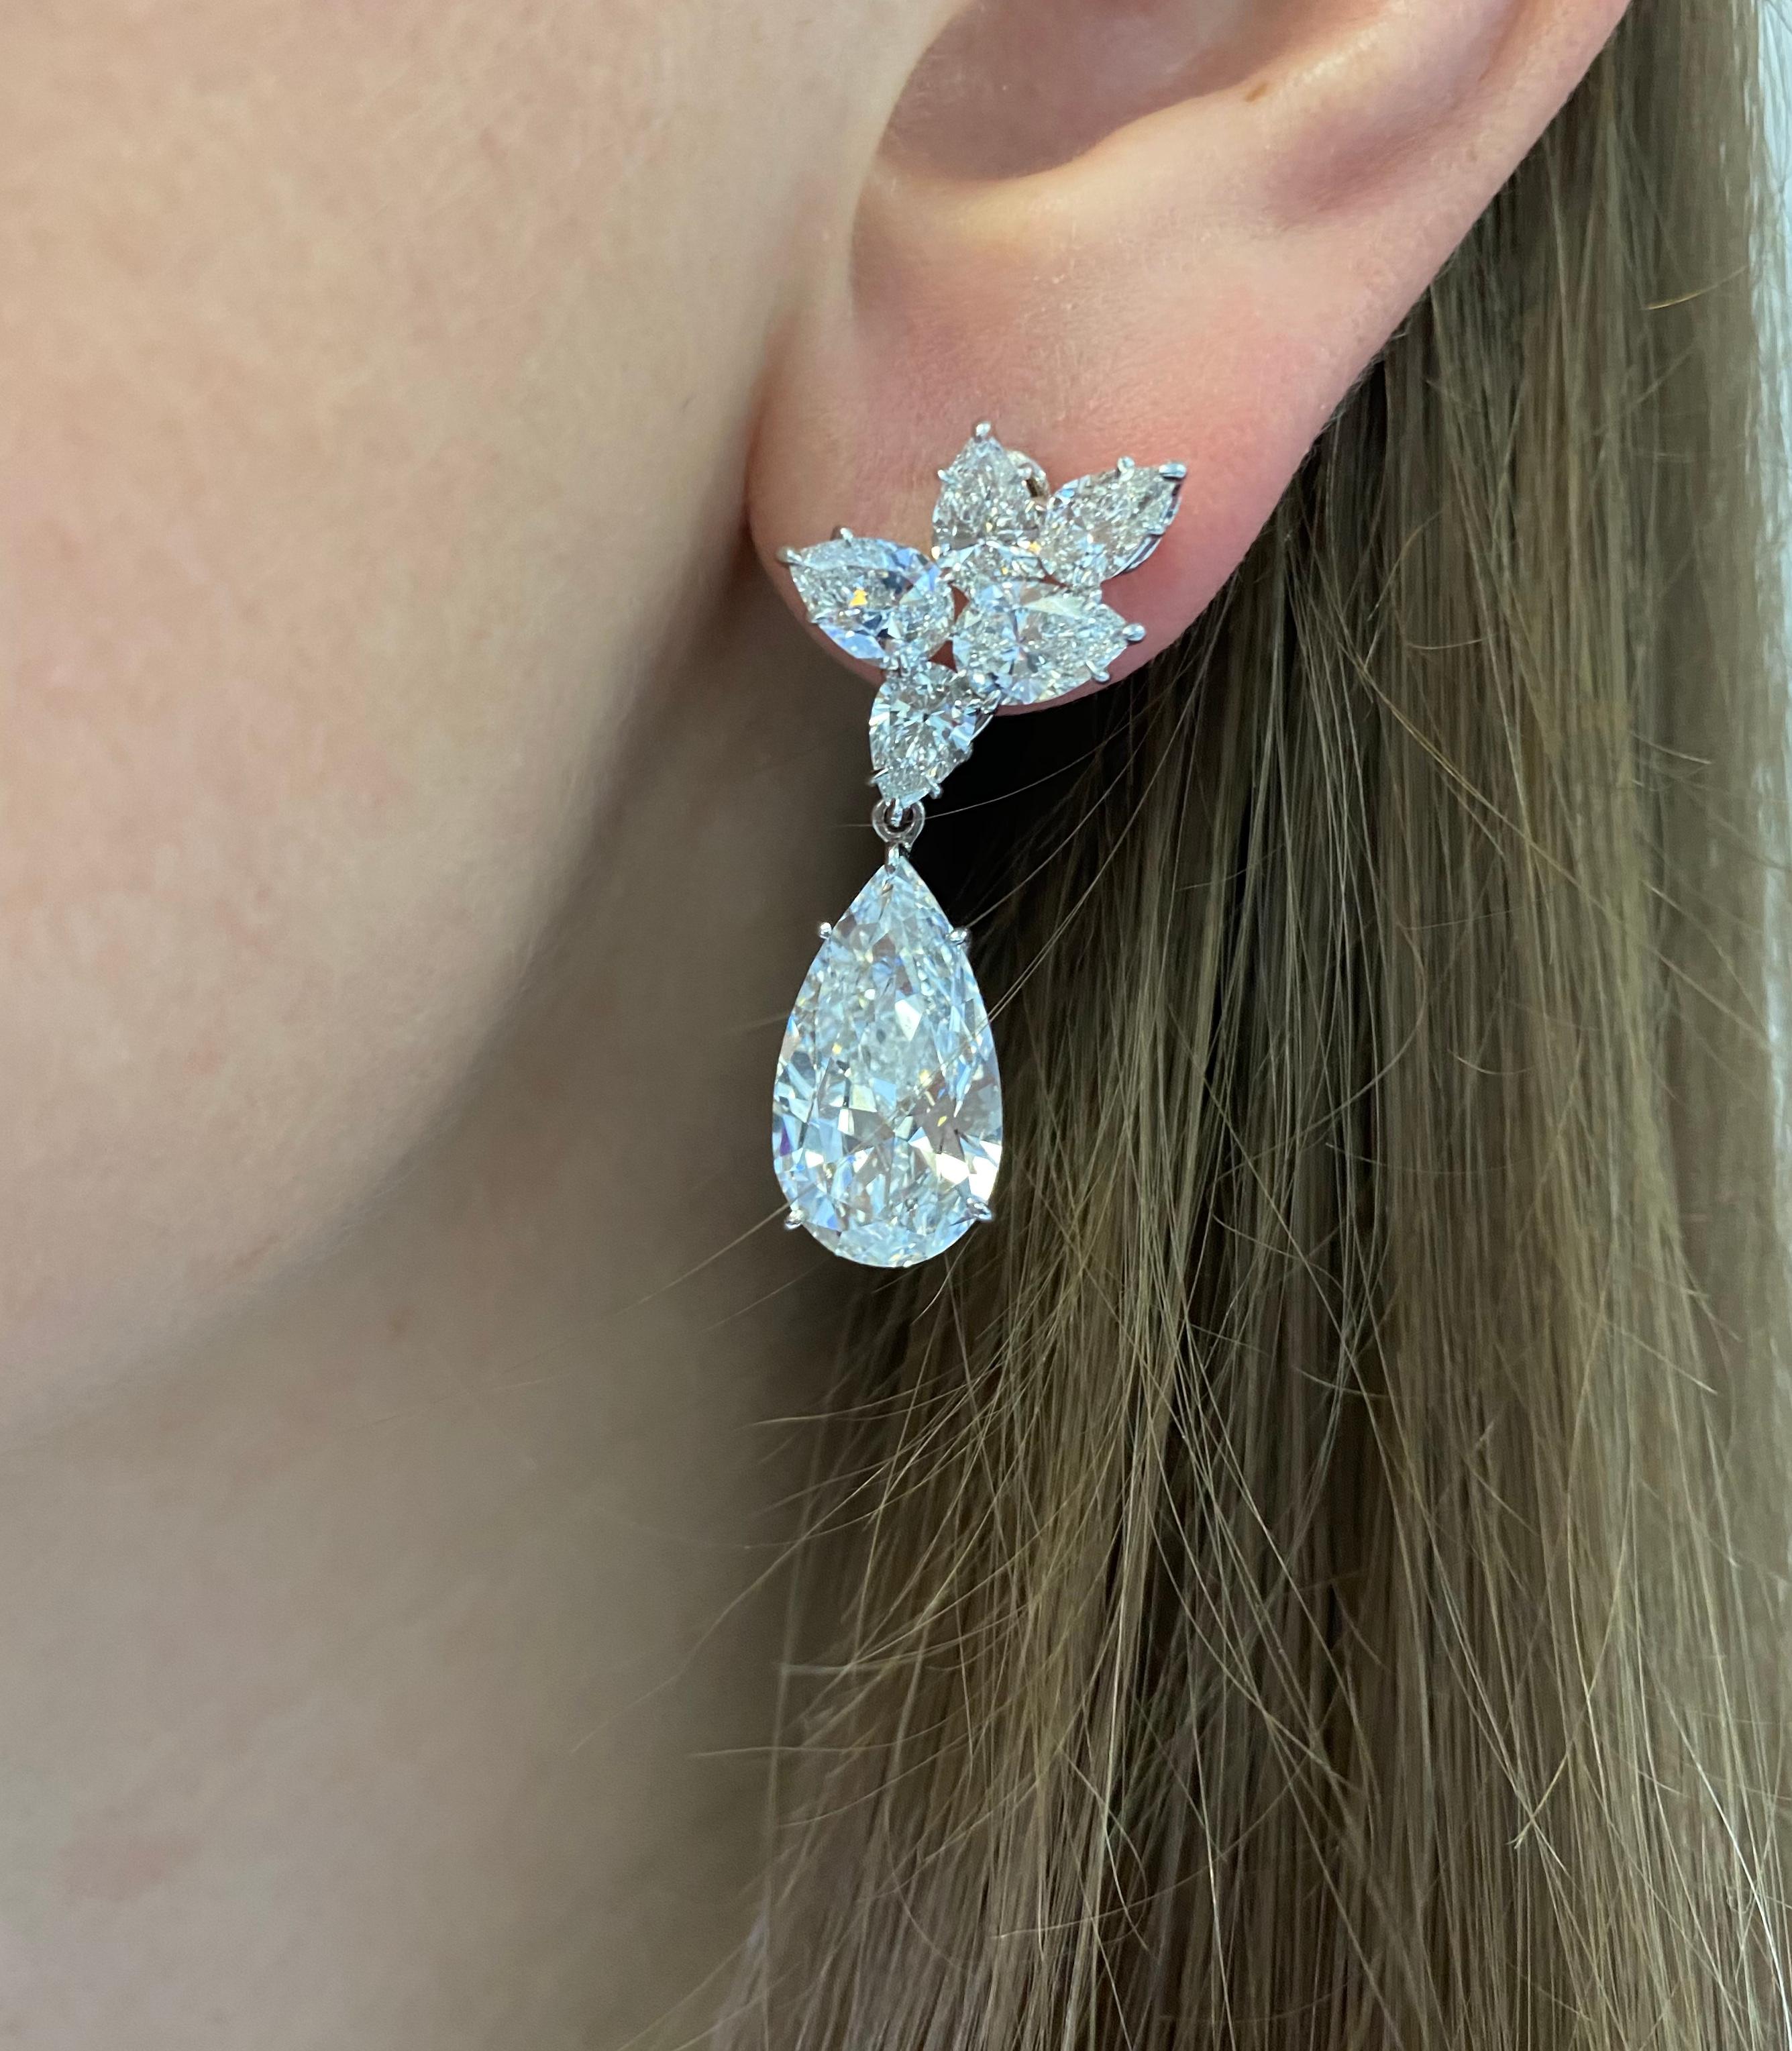 Platinum And Diamond Pendant Earrings By Harry Winston. 
Set With Two Pear-Shaped Diamonds
 5.56ct, D- VS2 GIA # XXXXXX )
5.05ct, D-VS2 (GIA # XXXXXX) 
Suspended By Clusters Of 12 Pear- Shaped Diamonds Weighing Approx. 5.00carat Color: E-F, Clarity: